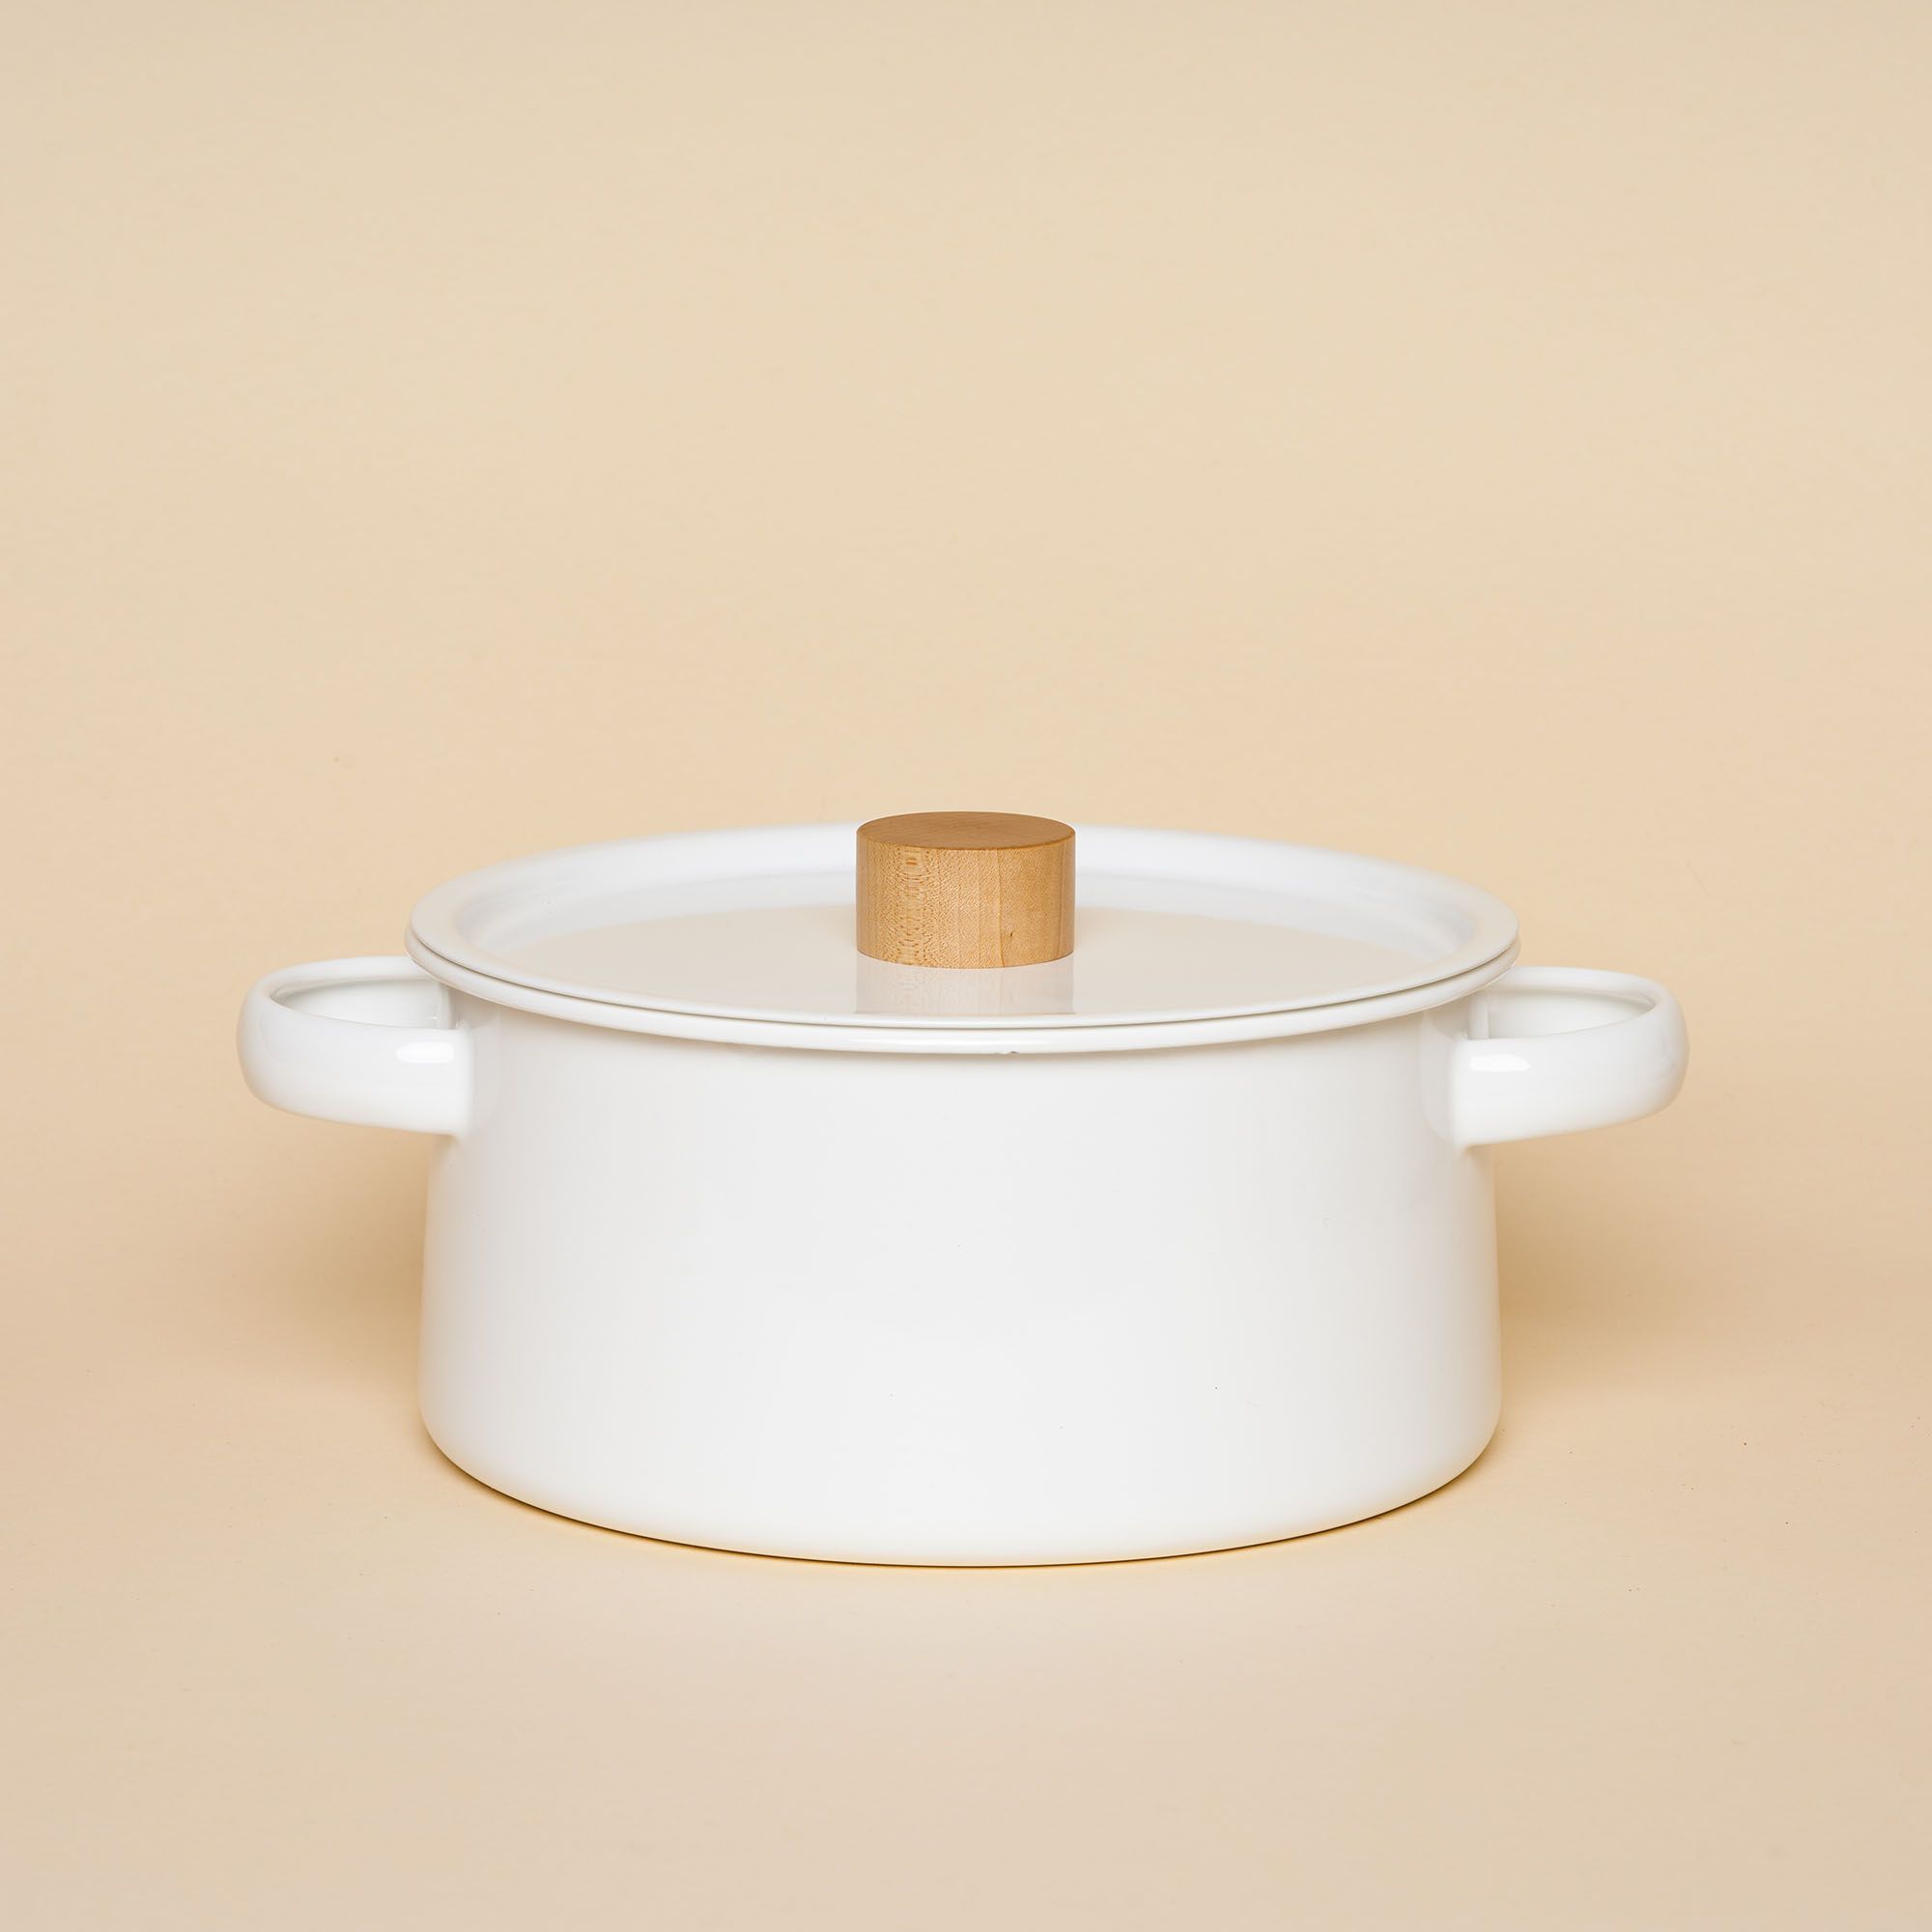 A white enamel pot with a tapered shape, handles on the side and light wooden handle on top.